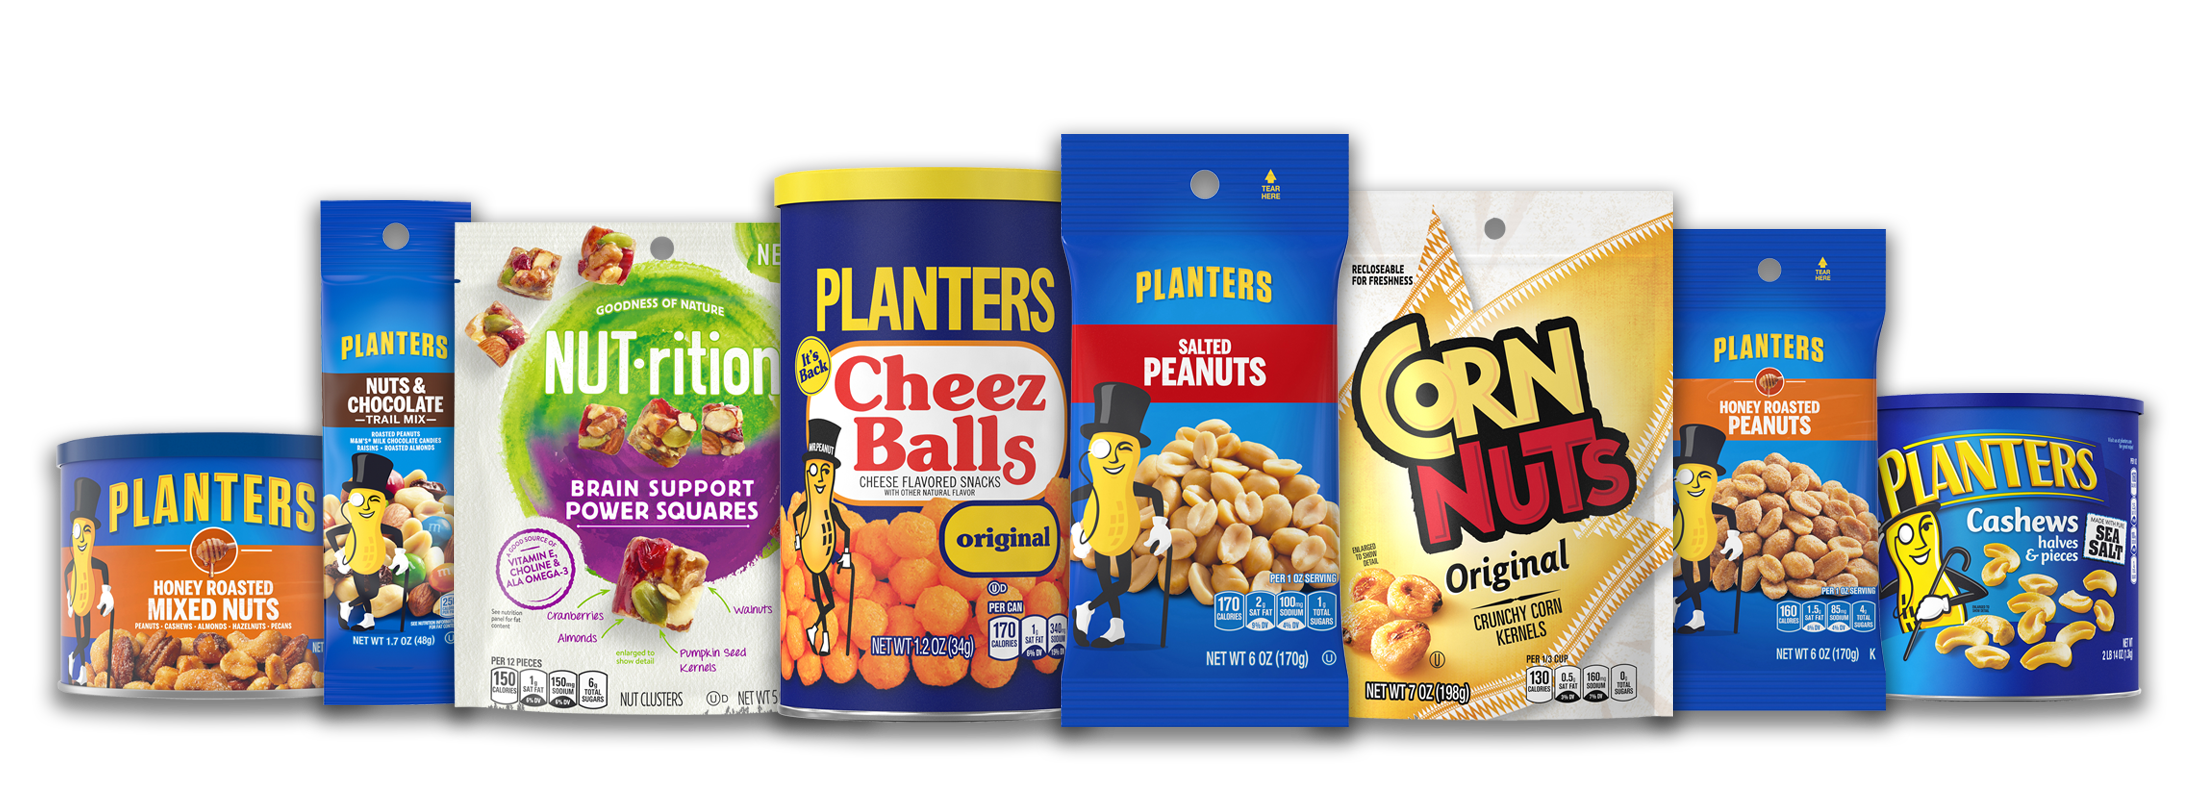 Planters brand family of products